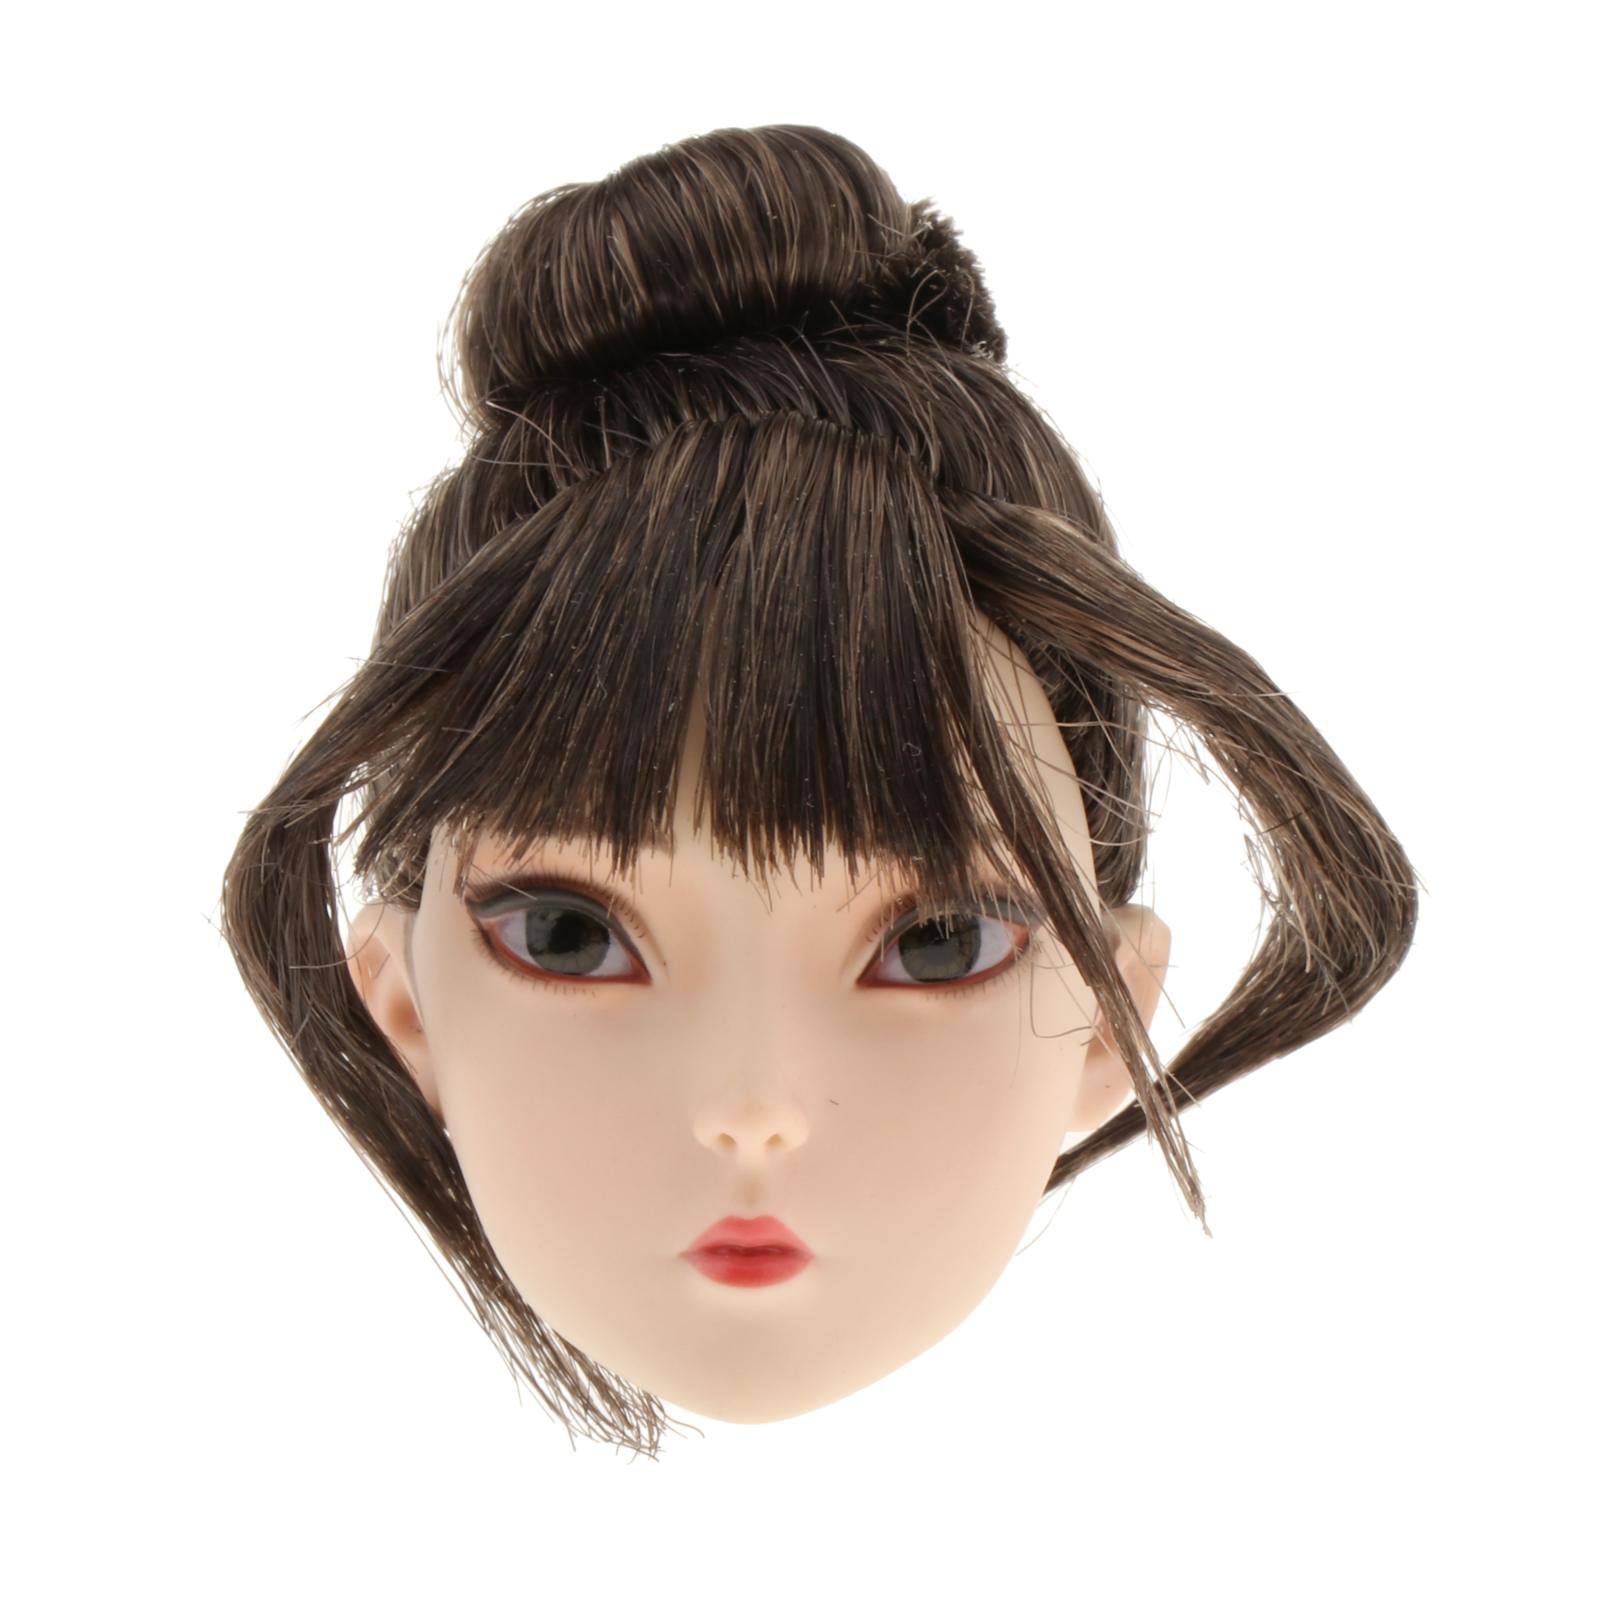 1/6 Scale Variety Fashion Hairstyle Head Sculpt Model For 12" Female Figure Body 